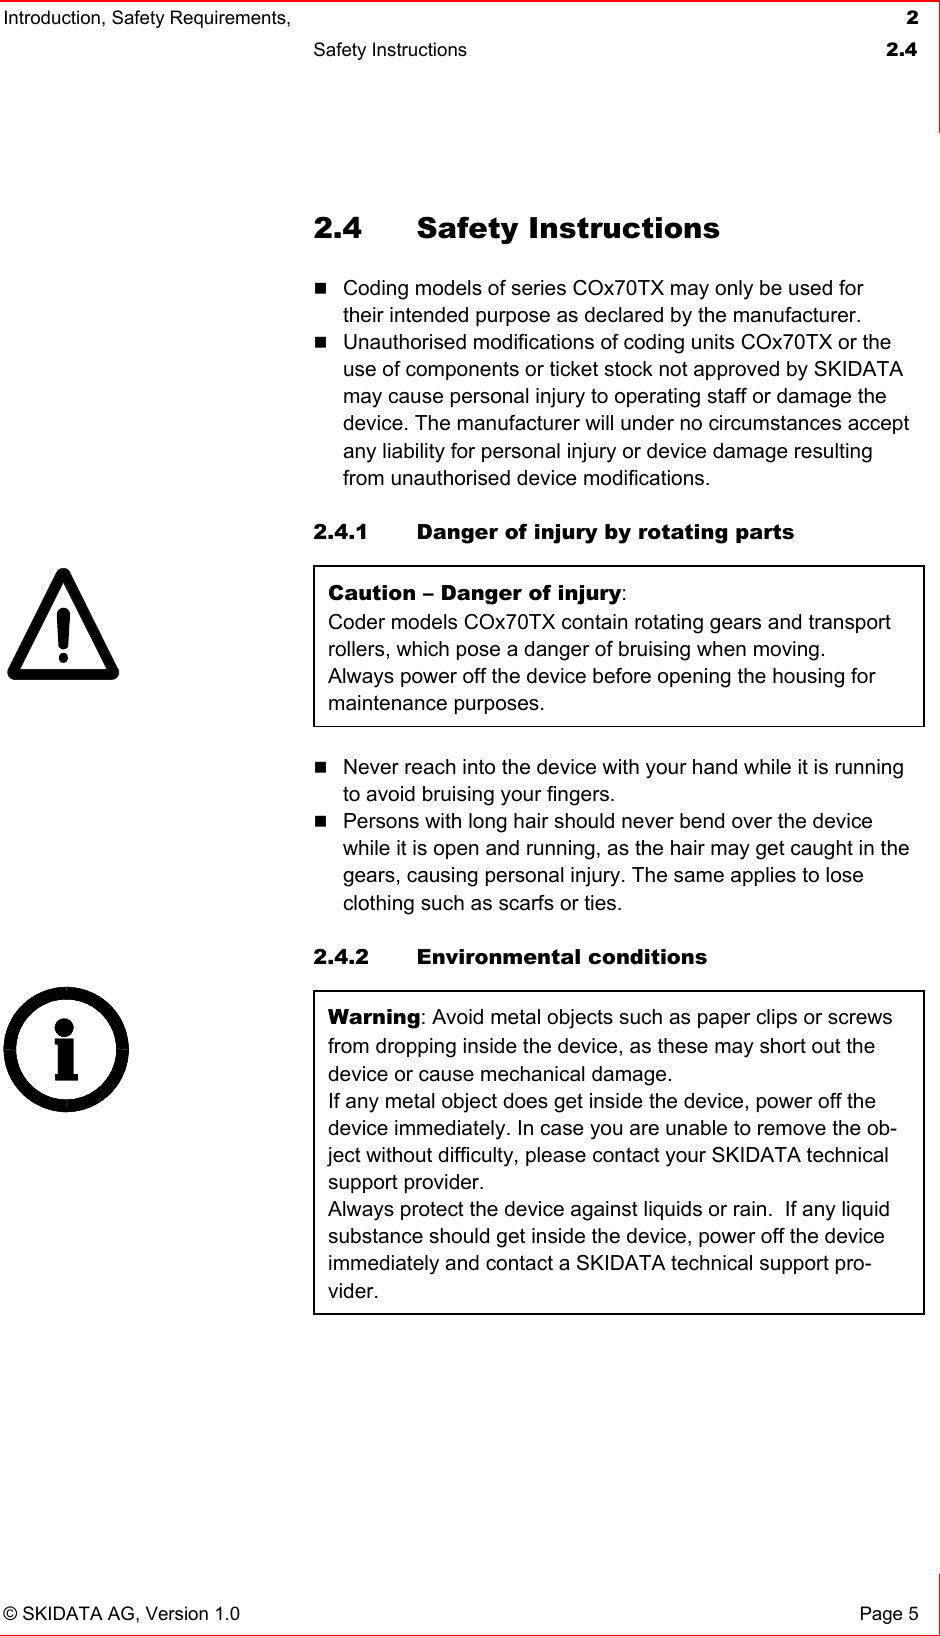 Introduction, Safety Requirements,  2 Safety Instructions  2.4   © SKIDATA AG, Version 1.0  Page 5 2.4 Safety Instructions  Coding models of series COx70TX may only be used for their intended purpose as declared by the manufacturer.  Unauthorised modifications of coding units COx70TX or the use of components or ticket stock not approved by SKIDATA may cause personal injury to operating staff or damage the device. The manufacturer will under no circumstances accept any liability for personal injury or device damage resulting from unauthorised device modifications.   2.4.1  Danger of injury by rotating parts Caution – Danger of injury:  Coder models COx70TX contain rotating gears and transport rollers, which pose a danger of bruising when moving. Always power off the device before opening the housing for maintenance purposes.  Never reach into the device with your hand while it is running to avoid bruising your fingers.  Persons with long hair should never bend over the device while it is open and running, as the hair may get caught in the gears, causing personal injury. The same applies to lose clothing such as scarfs or ties.   2.4.2 Environmental conditions Warning: Avoid metal objects such as paper clips or screws from dropping inside the device, as these may short out the device or cause mechanical damage. If any metal object does get inside the device, power off the device immediately. In case you are unable to remove the ob-ject without difficulty, please contact your SKIDATA technical support provider.  Always protect the device against liquids or rain.  If any liquid substance should get inside the device, power off the device immediately and contact a SKIDATA technical support pro-vider.   